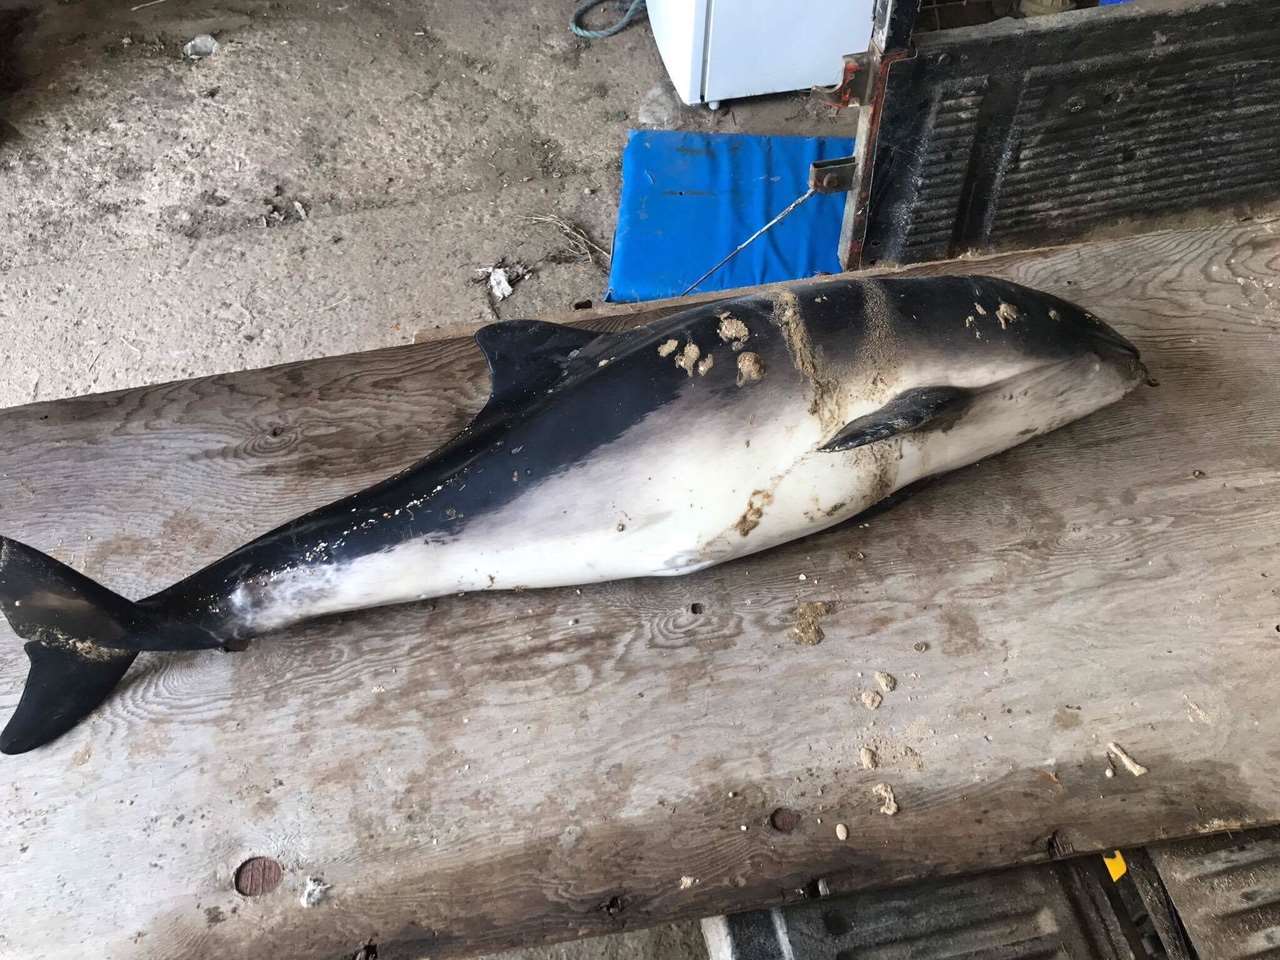 A dead porpoise found washed ashore at Leysdown